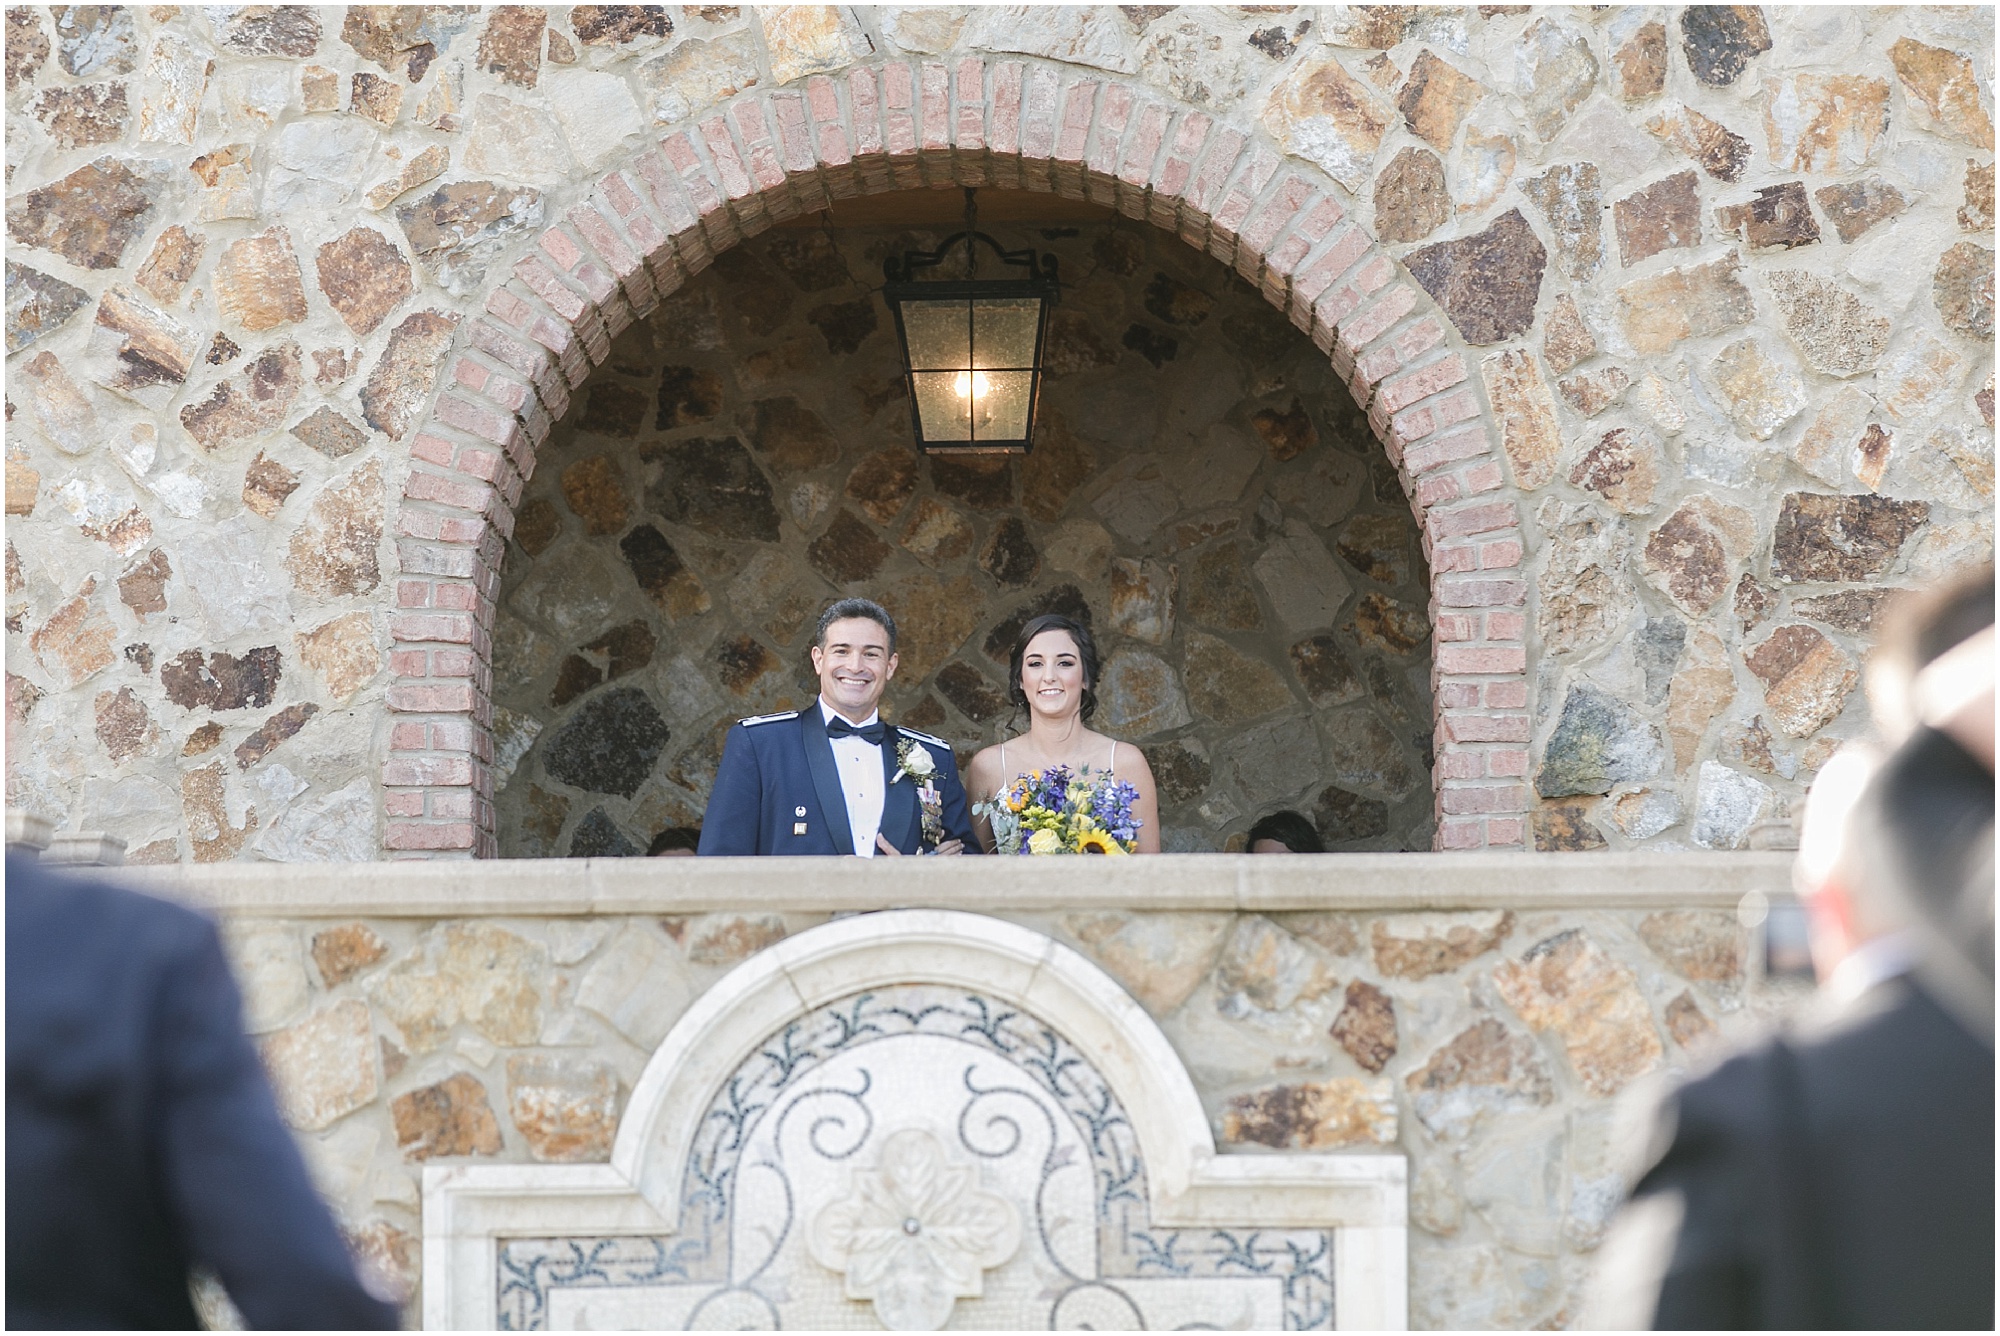 Bride and her father overlooking the ceremony site at Bella Collina.